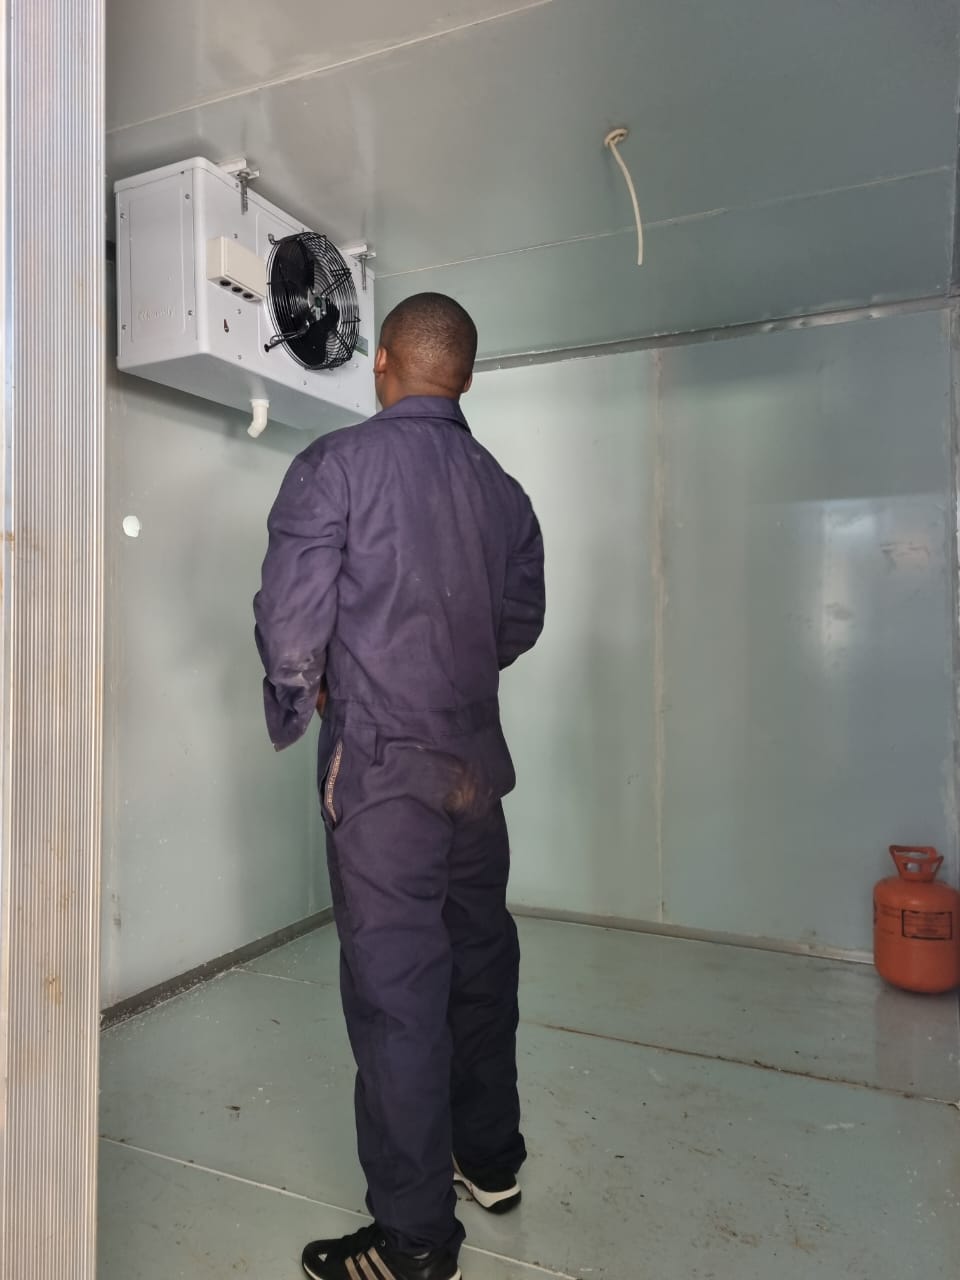 Cold Room manufacturers in Kenya – The Cold Room Kahuna